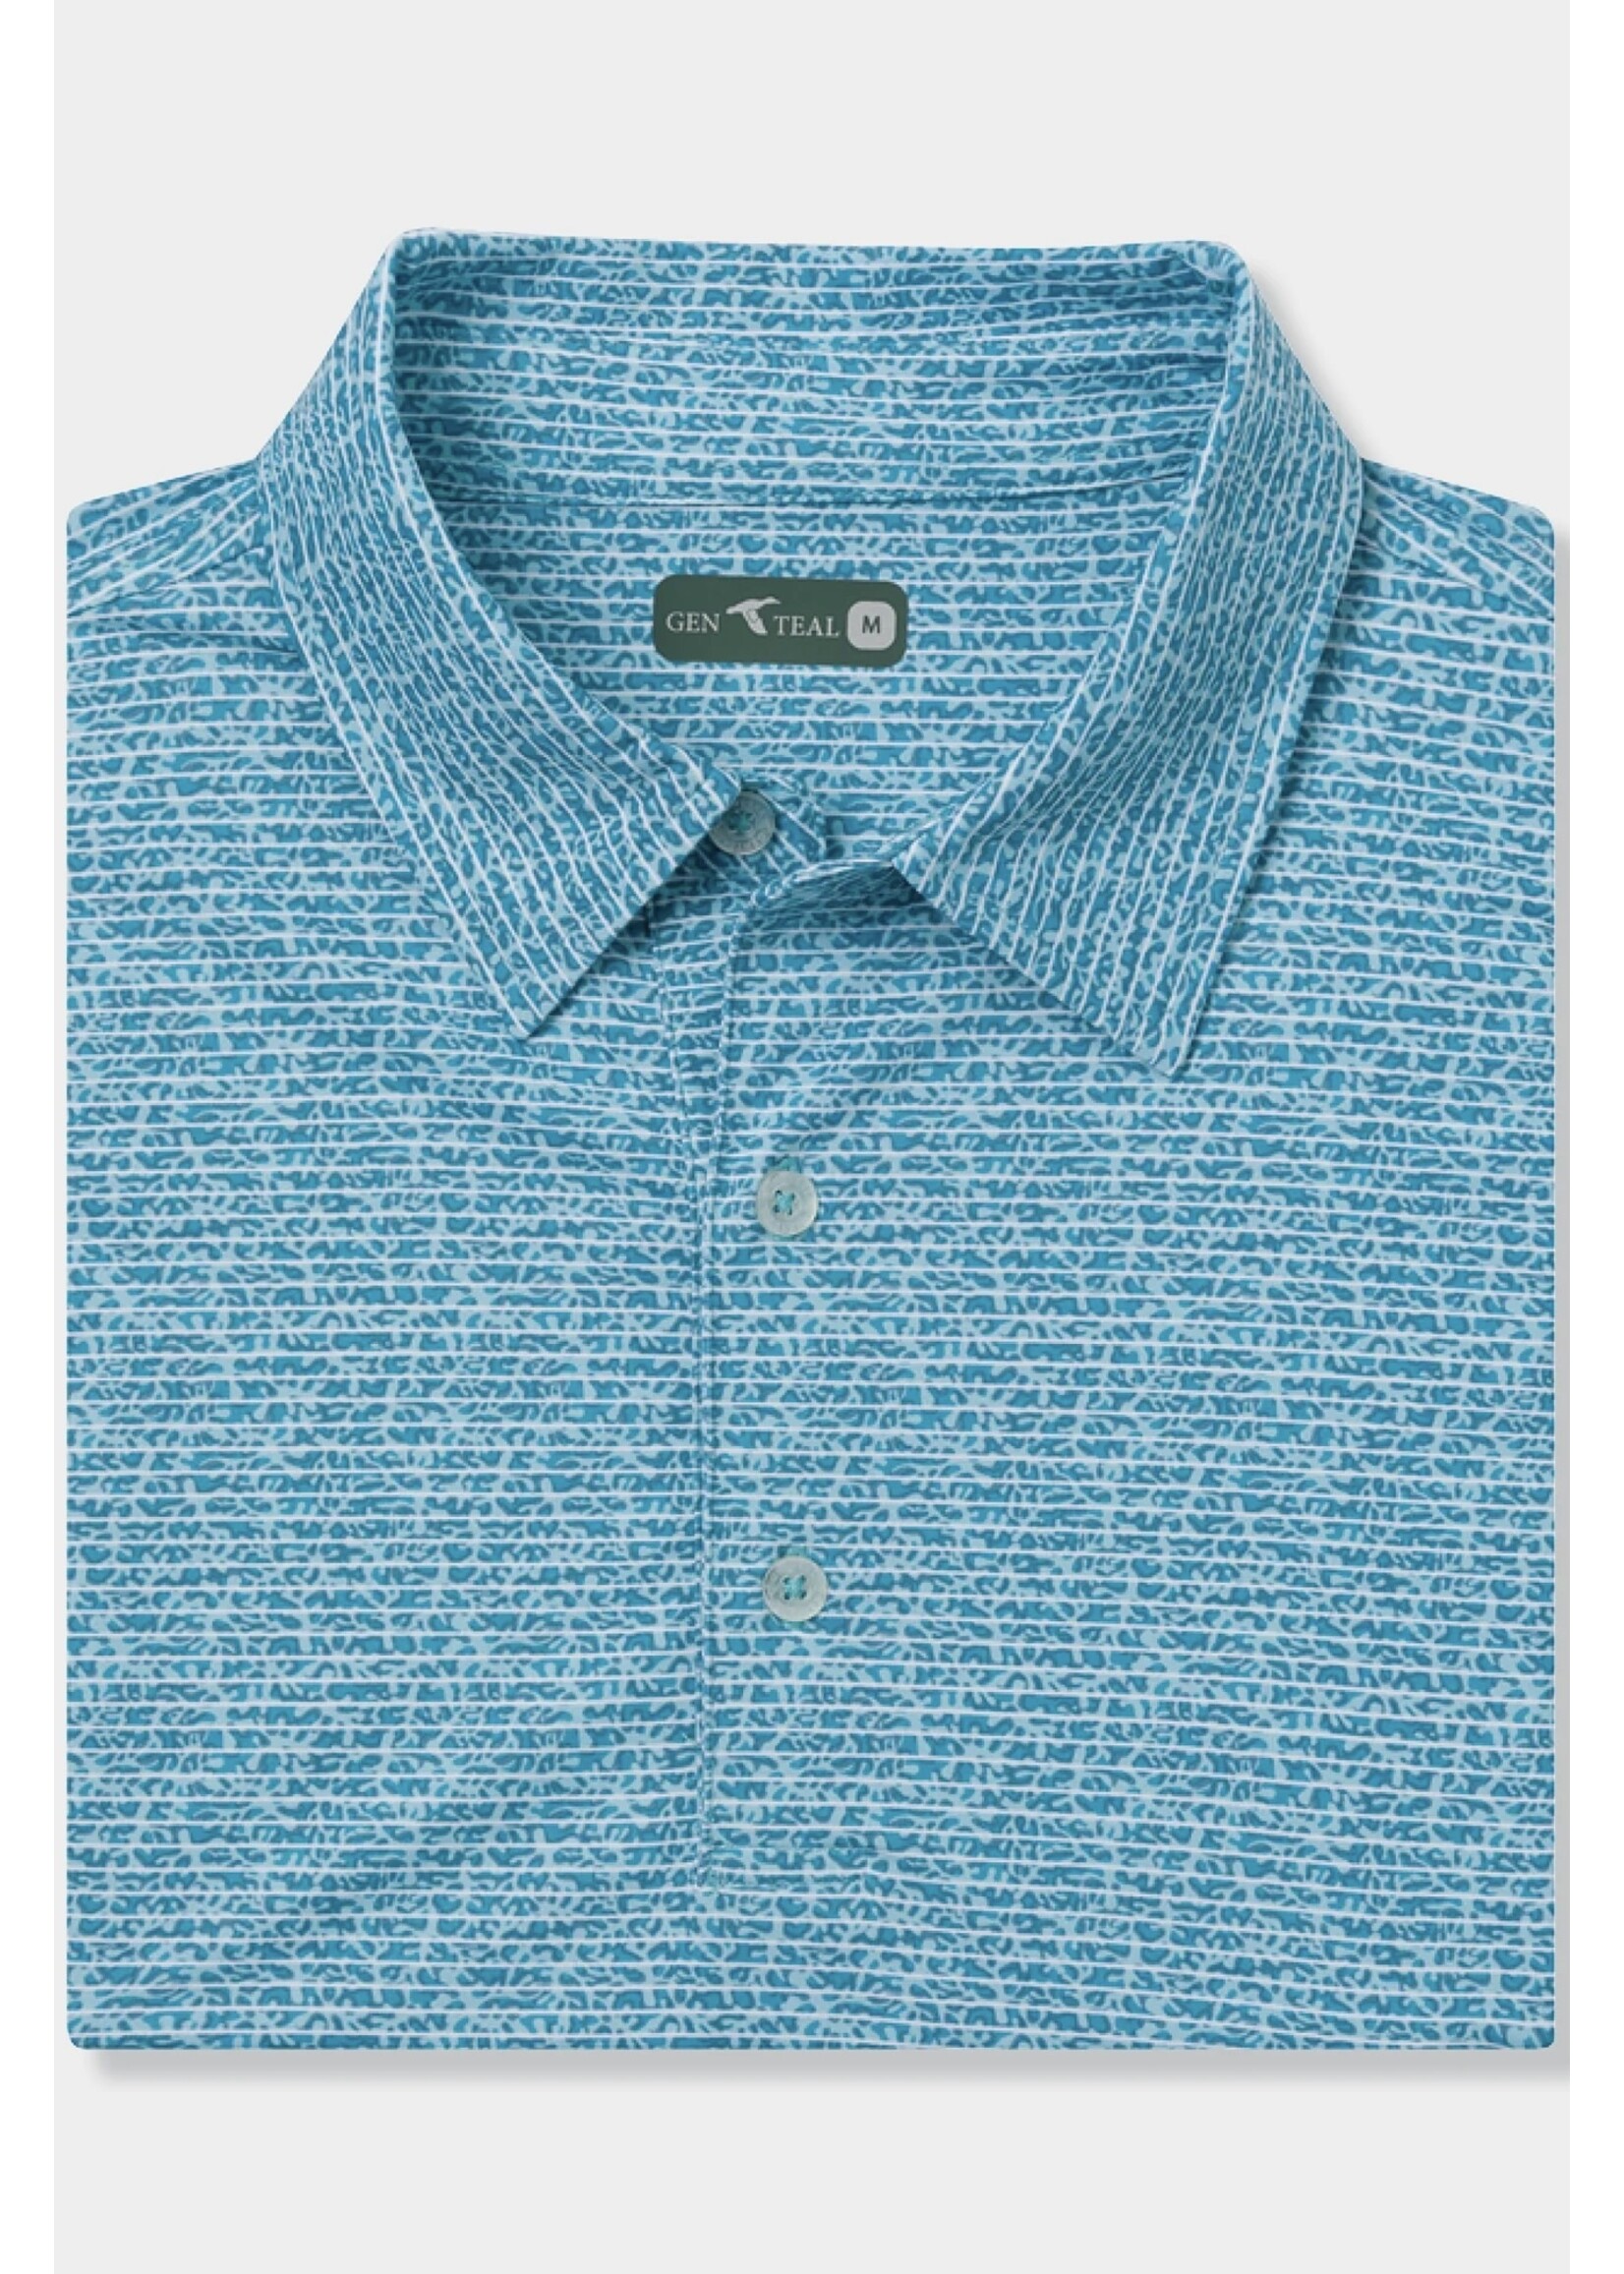 GenTeal Apparel Blue Coral brrr Performance Polo